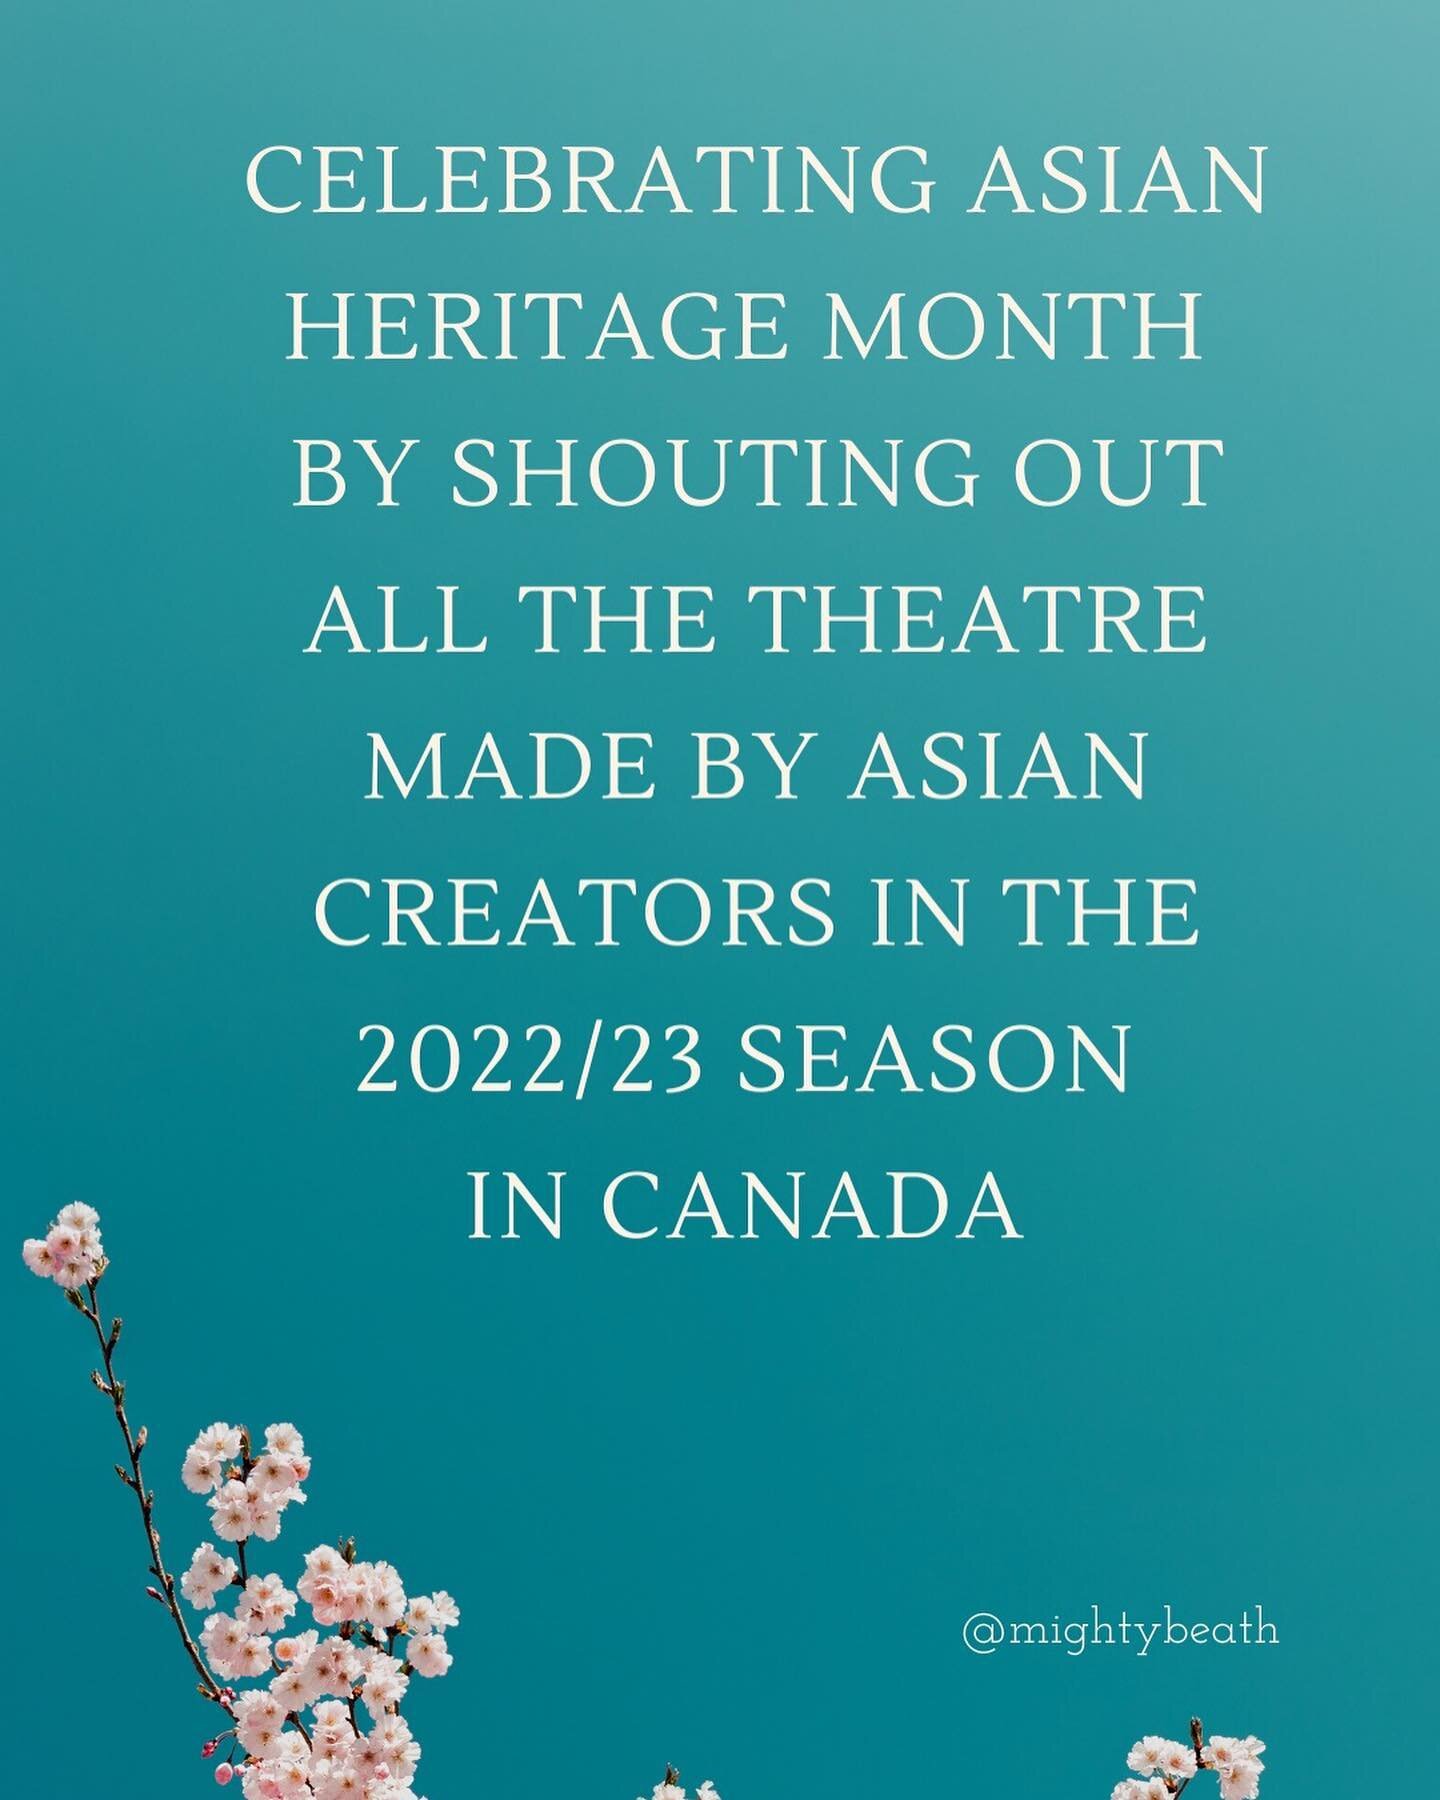 Dear Pals:

Ten years ago, I don&rsquo;t think I could have counted more than one or two theatre works by Asian creators in Canada in any given season. Look at this ABUNDANCE of work in the 2022/23 season alone. And I know there are more coming down 